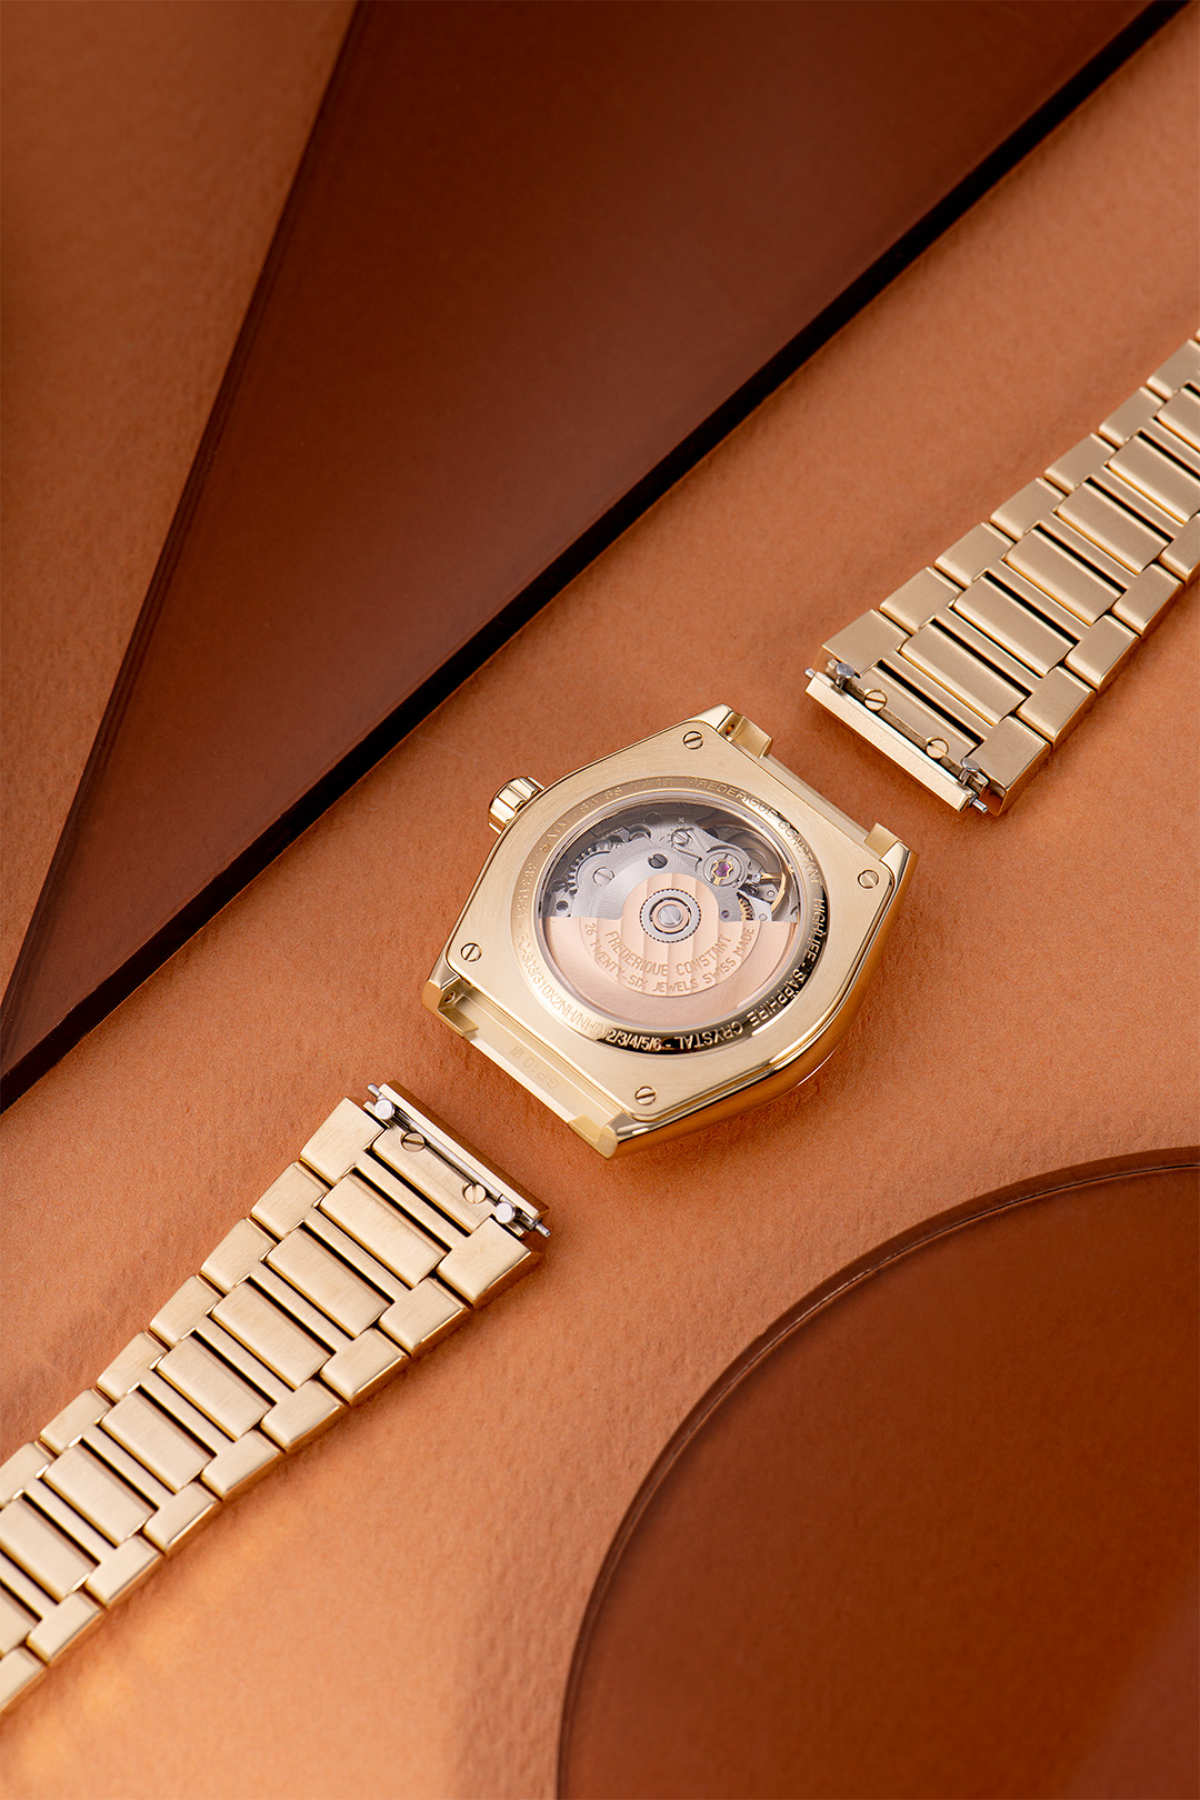 Frederique Constant Present Its New Highlife Ladies Automatic: A Golden Collection